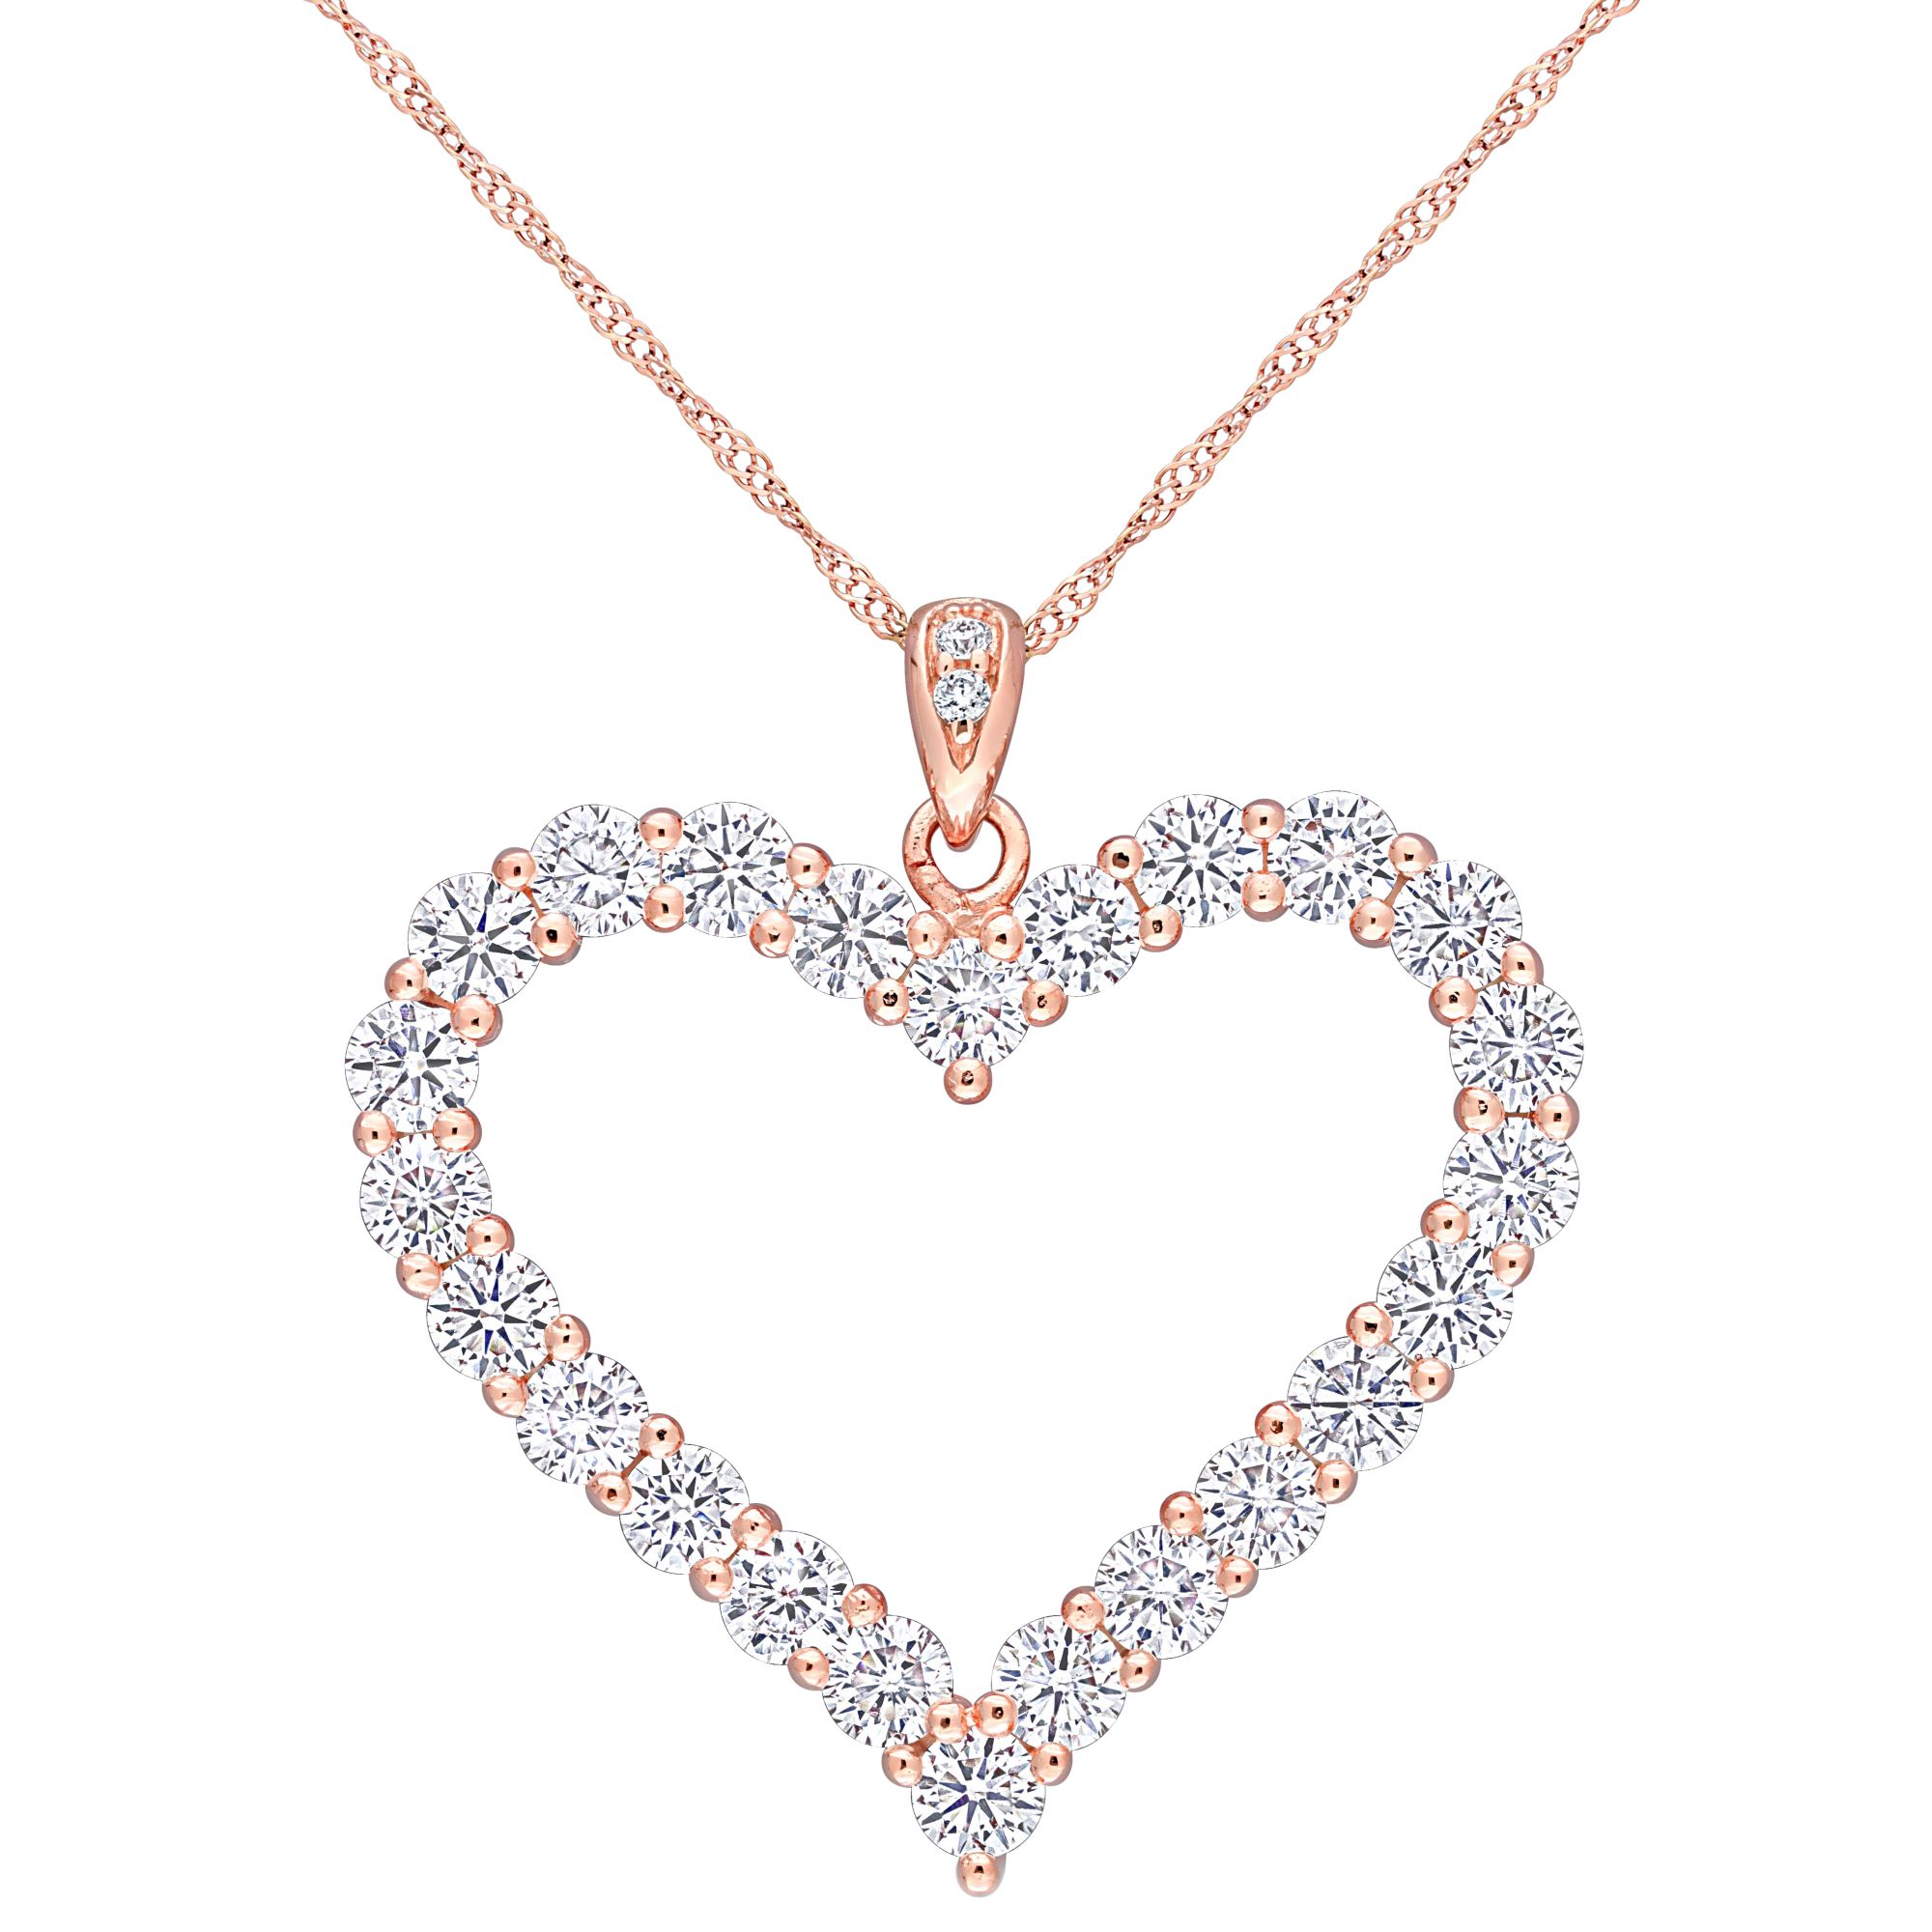 2.4 ct. DEW Created Moissanite Heart Necklace in Rose Gold Plated Sterling Silver